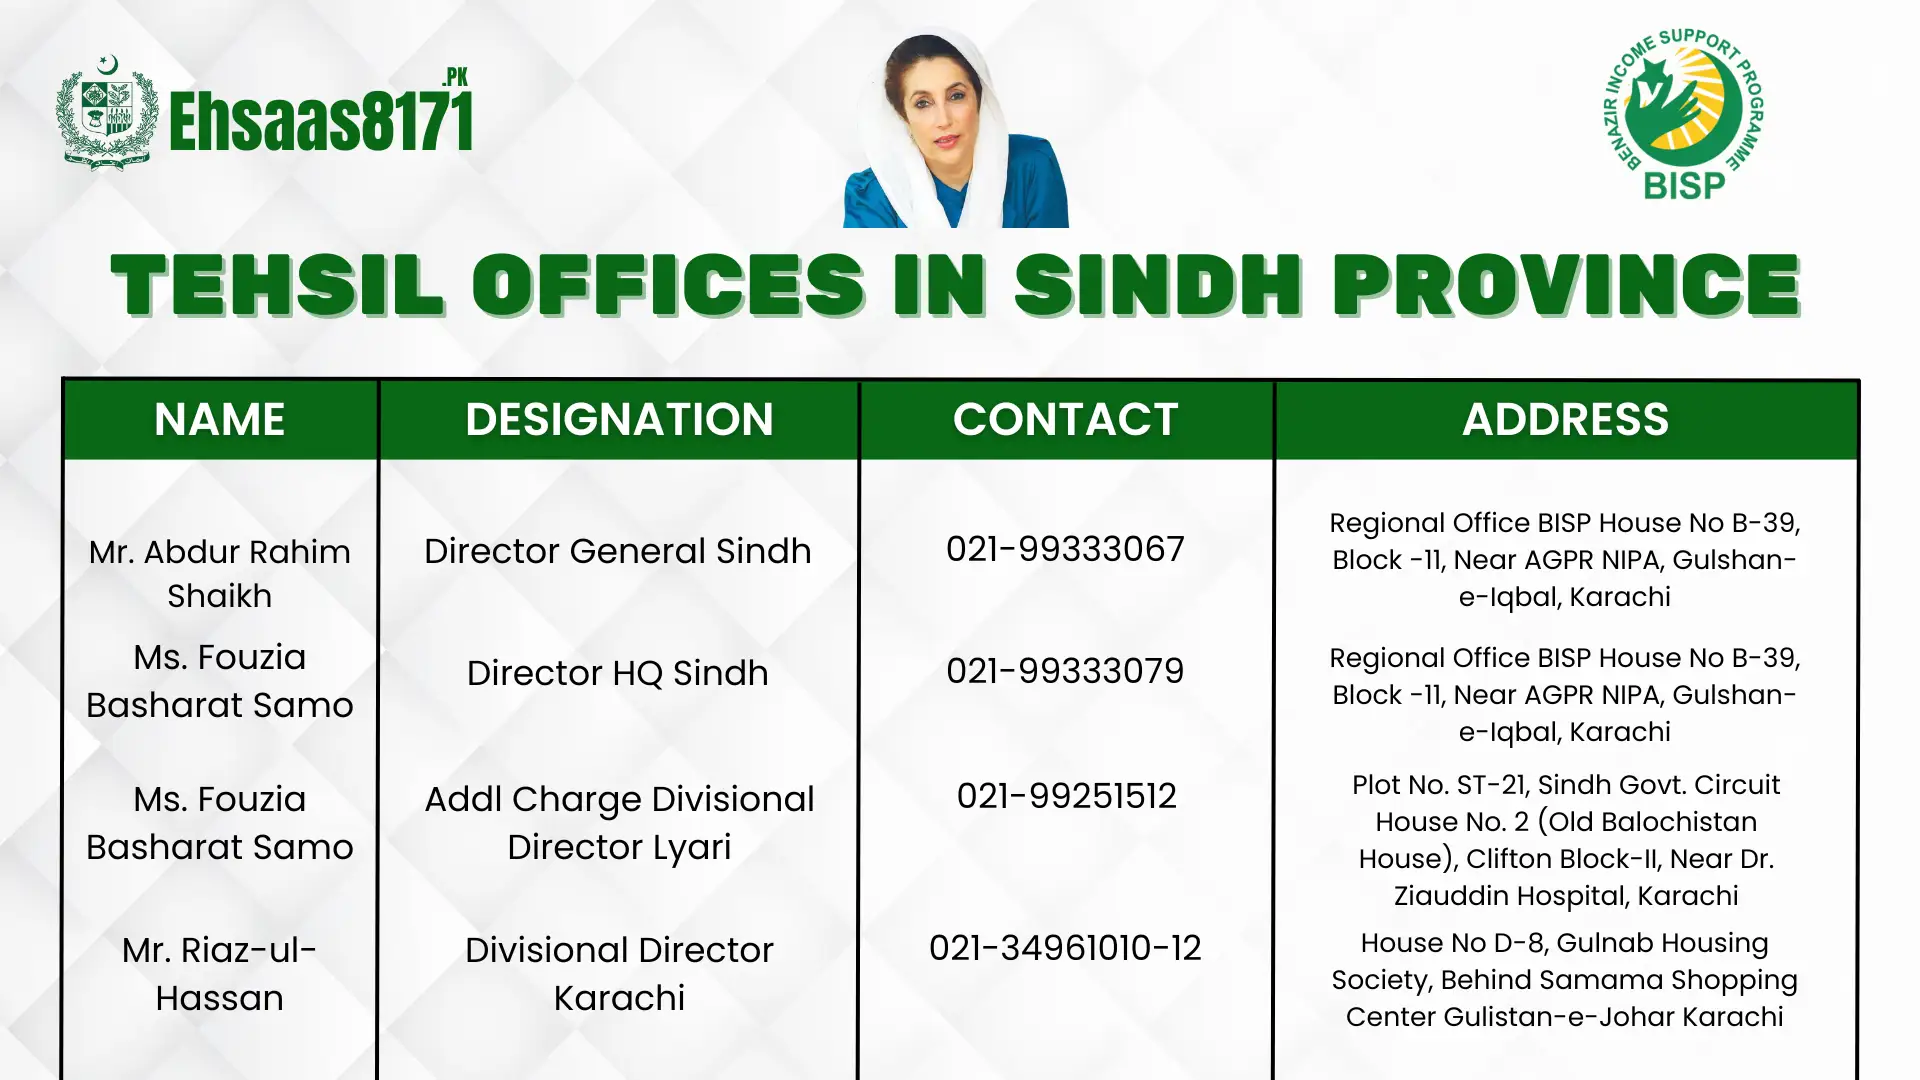 Tehsil Offices in Sindh Province